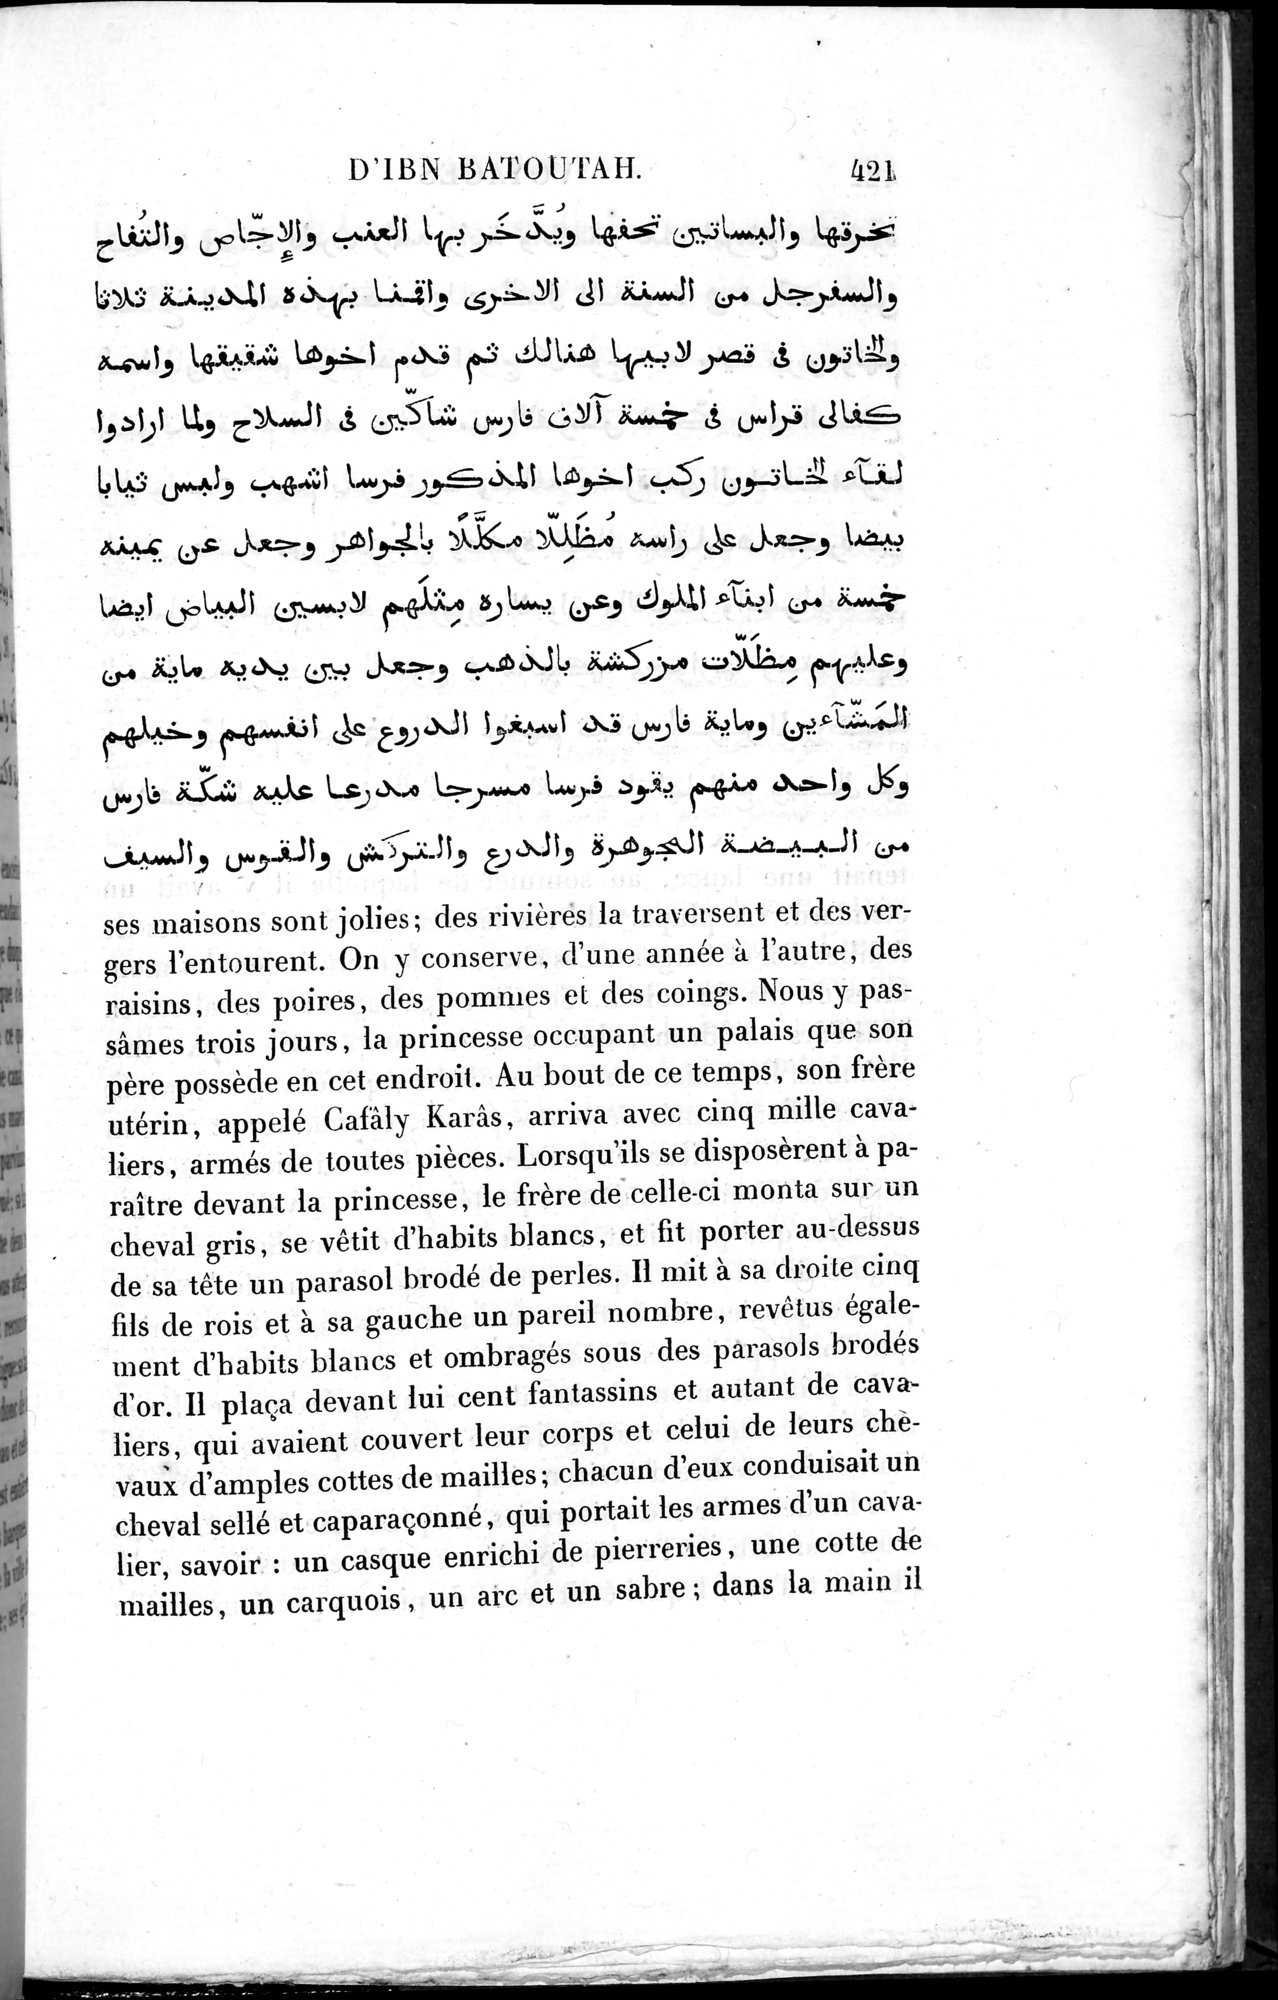 Voyages d'Ibn Batoutah : vol.2 / Page 449 (Grayscale High Resolution Image)